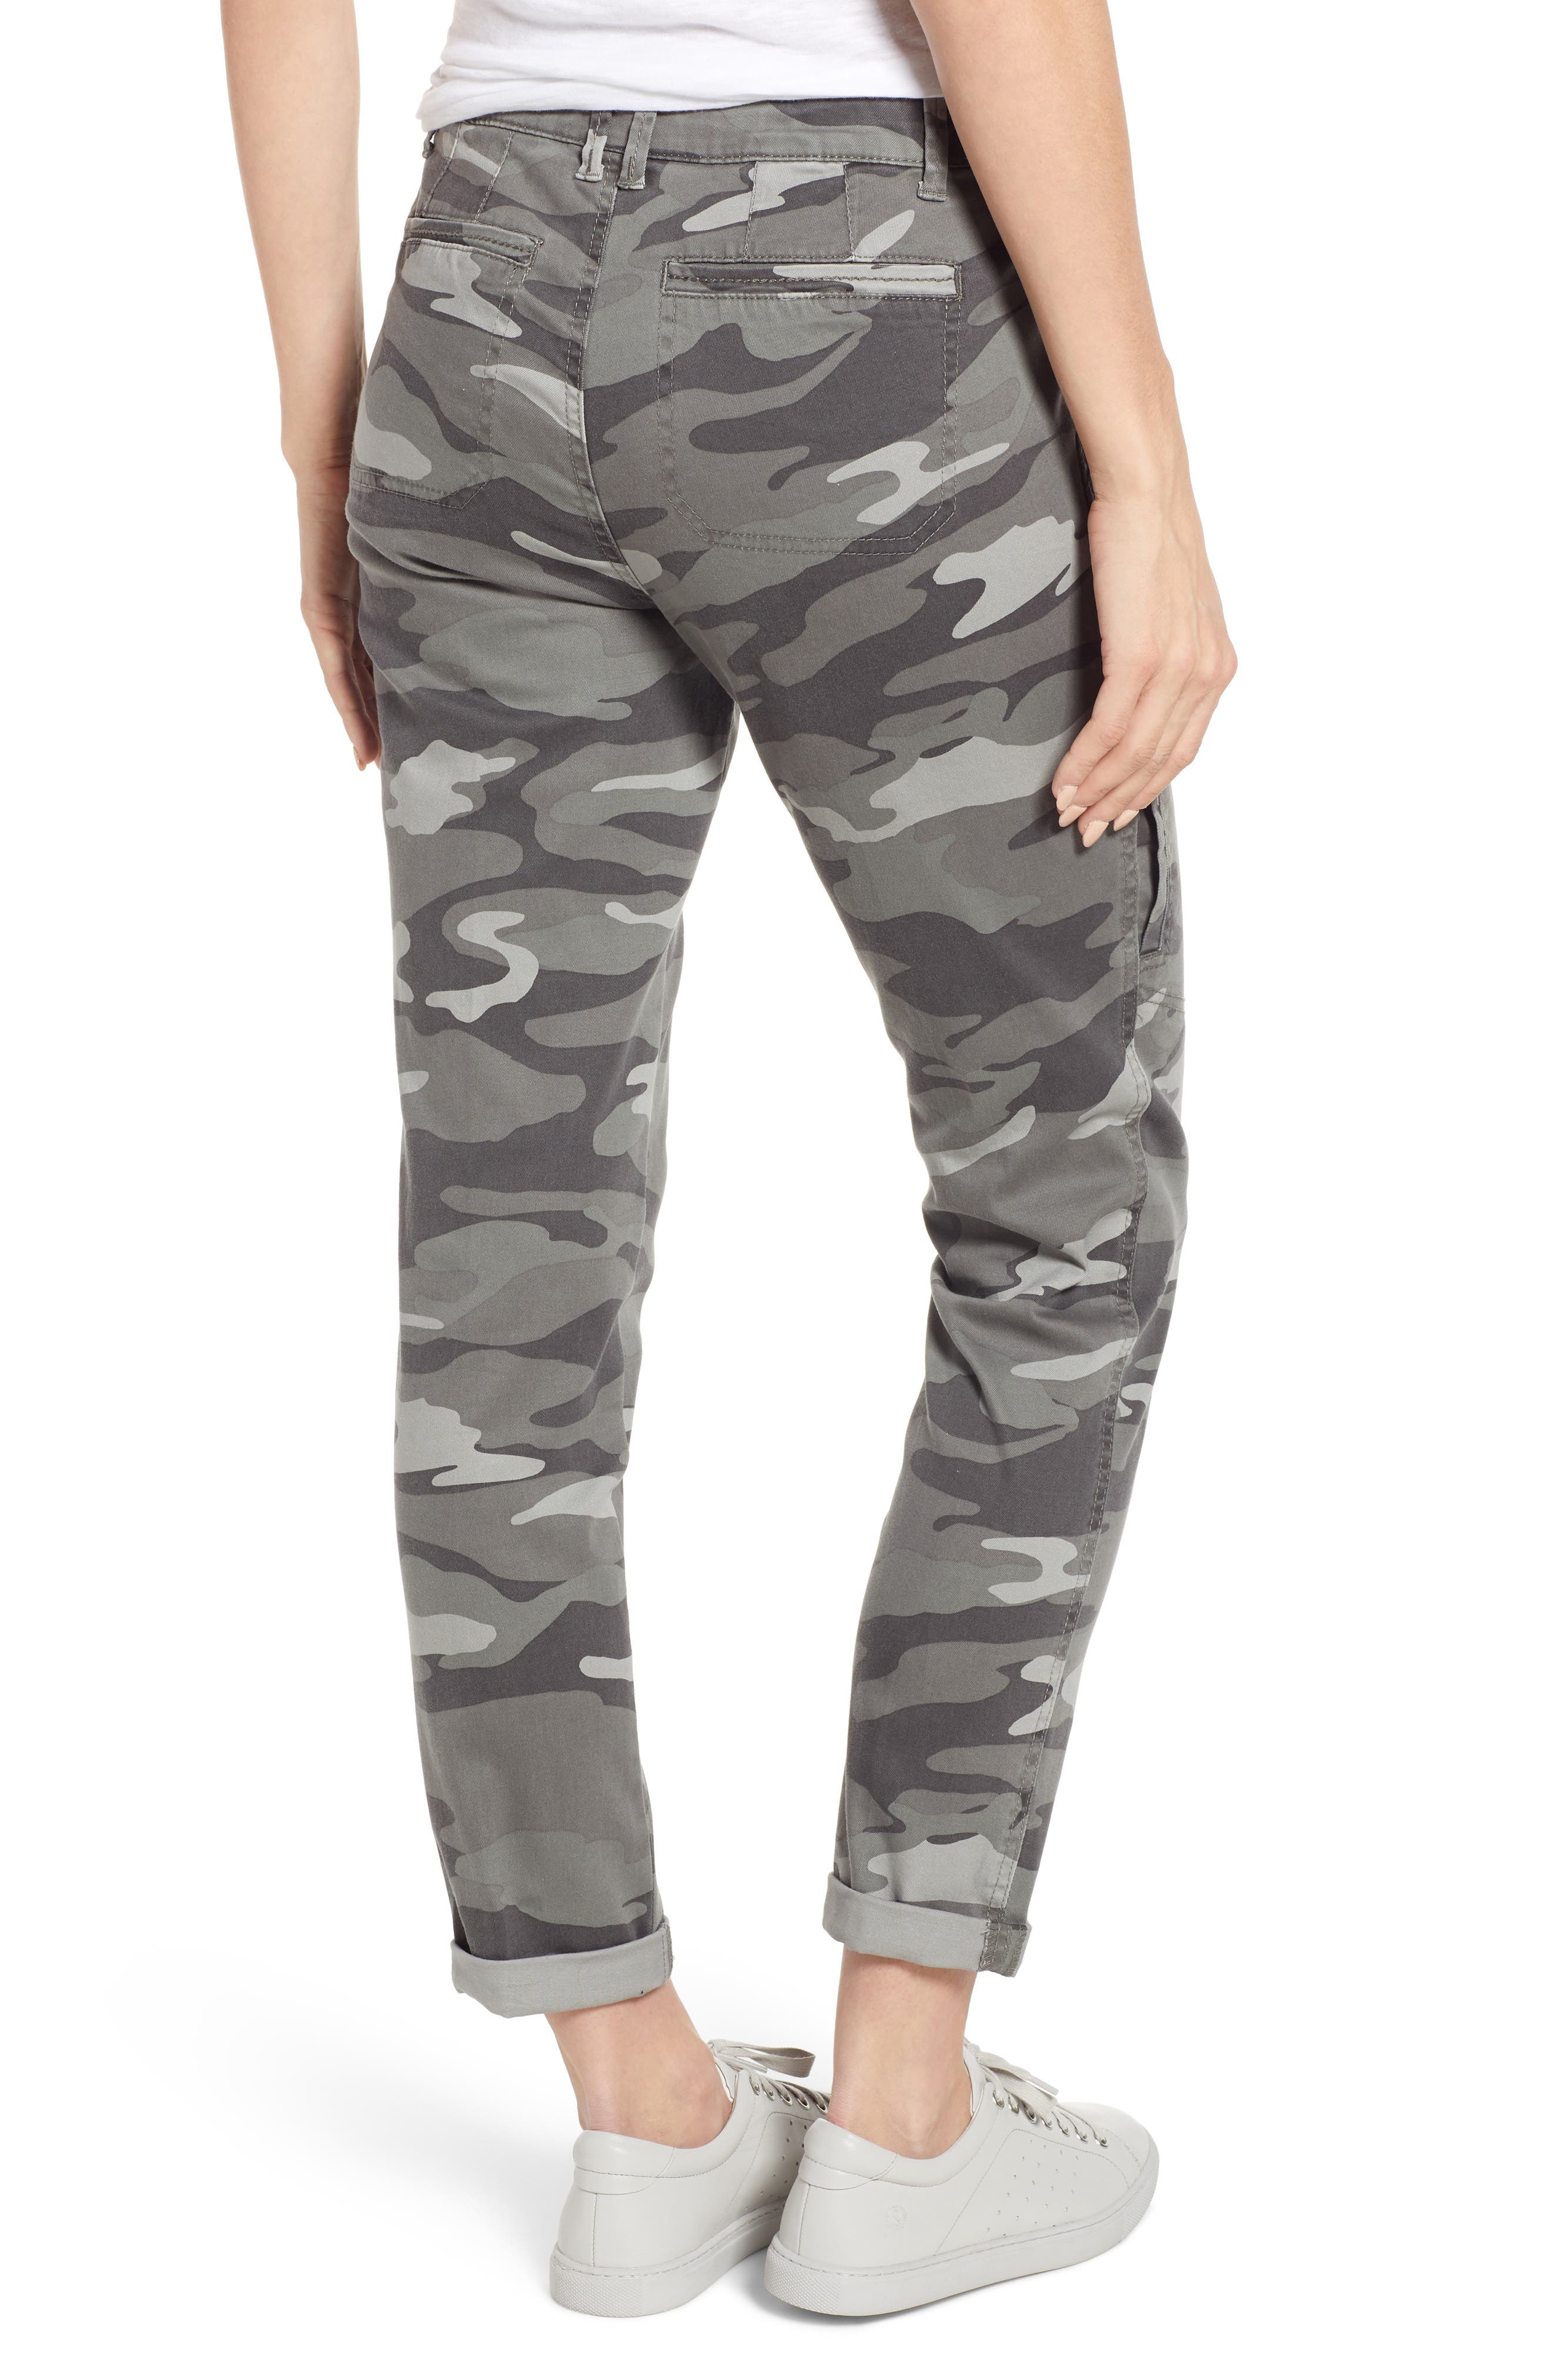 wit and wisdom cargo pants